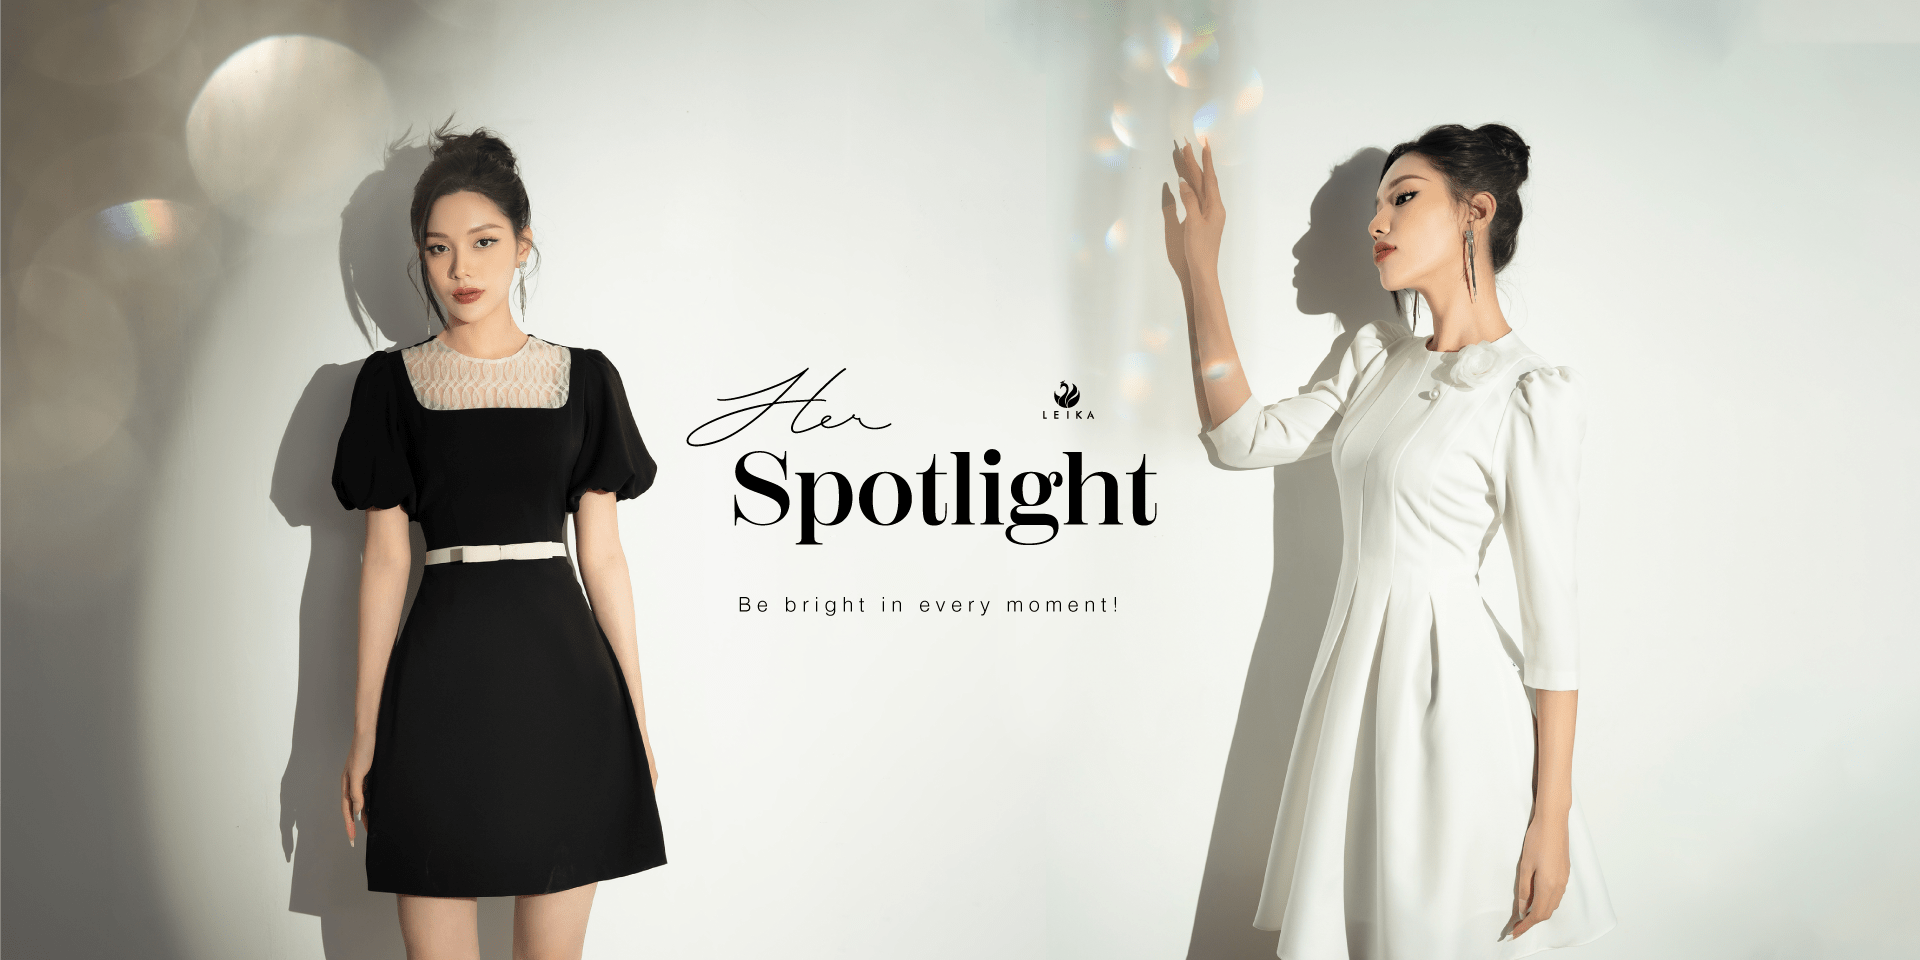 Her Spotllight | Collection 2023 by LEIKA